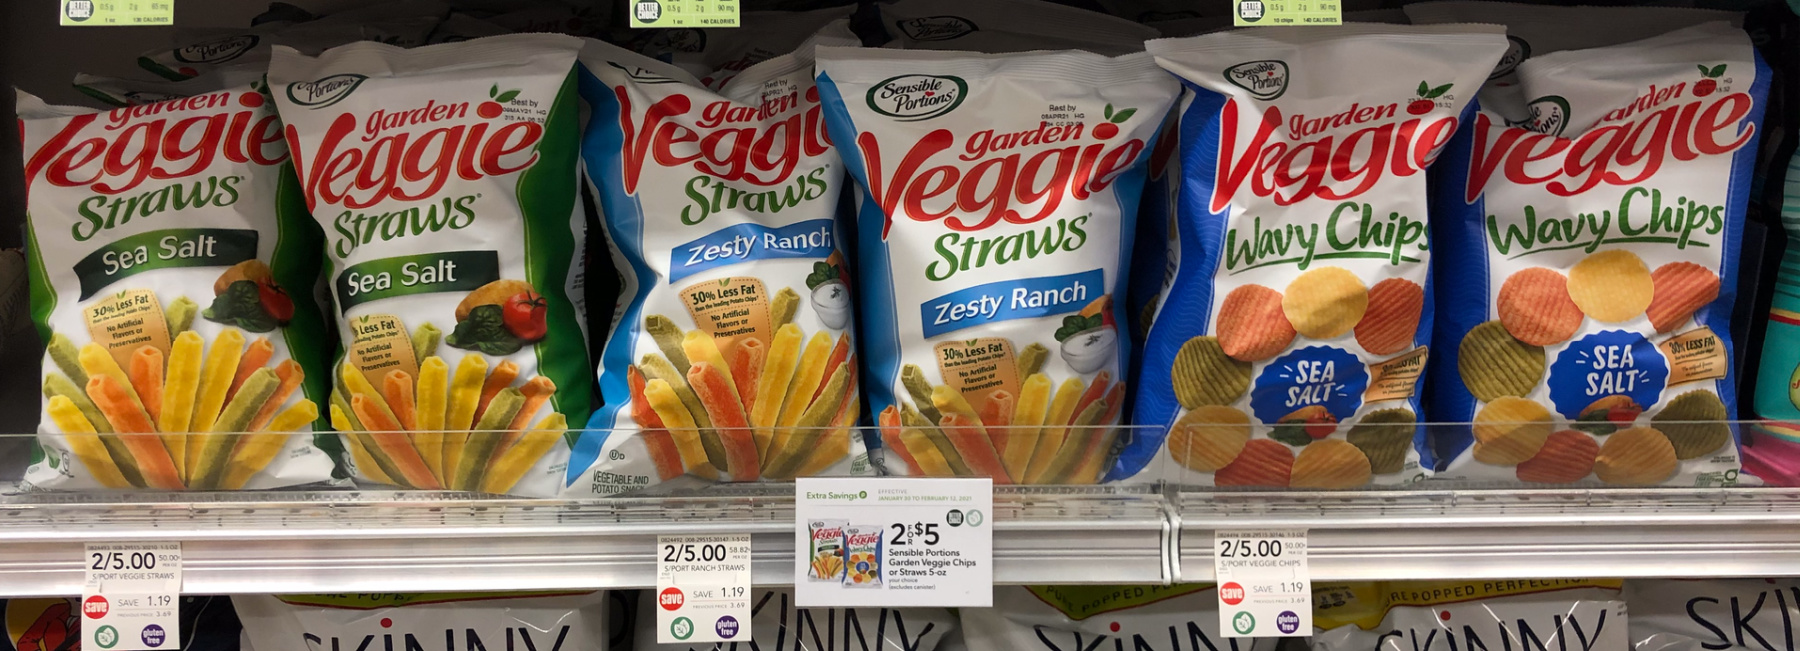 Grab A Great Deal On Tasty Snacks Your Whole Family Will Love - Sensible Portions Snacks Are 2/$5 At Publix on I Heart Publix